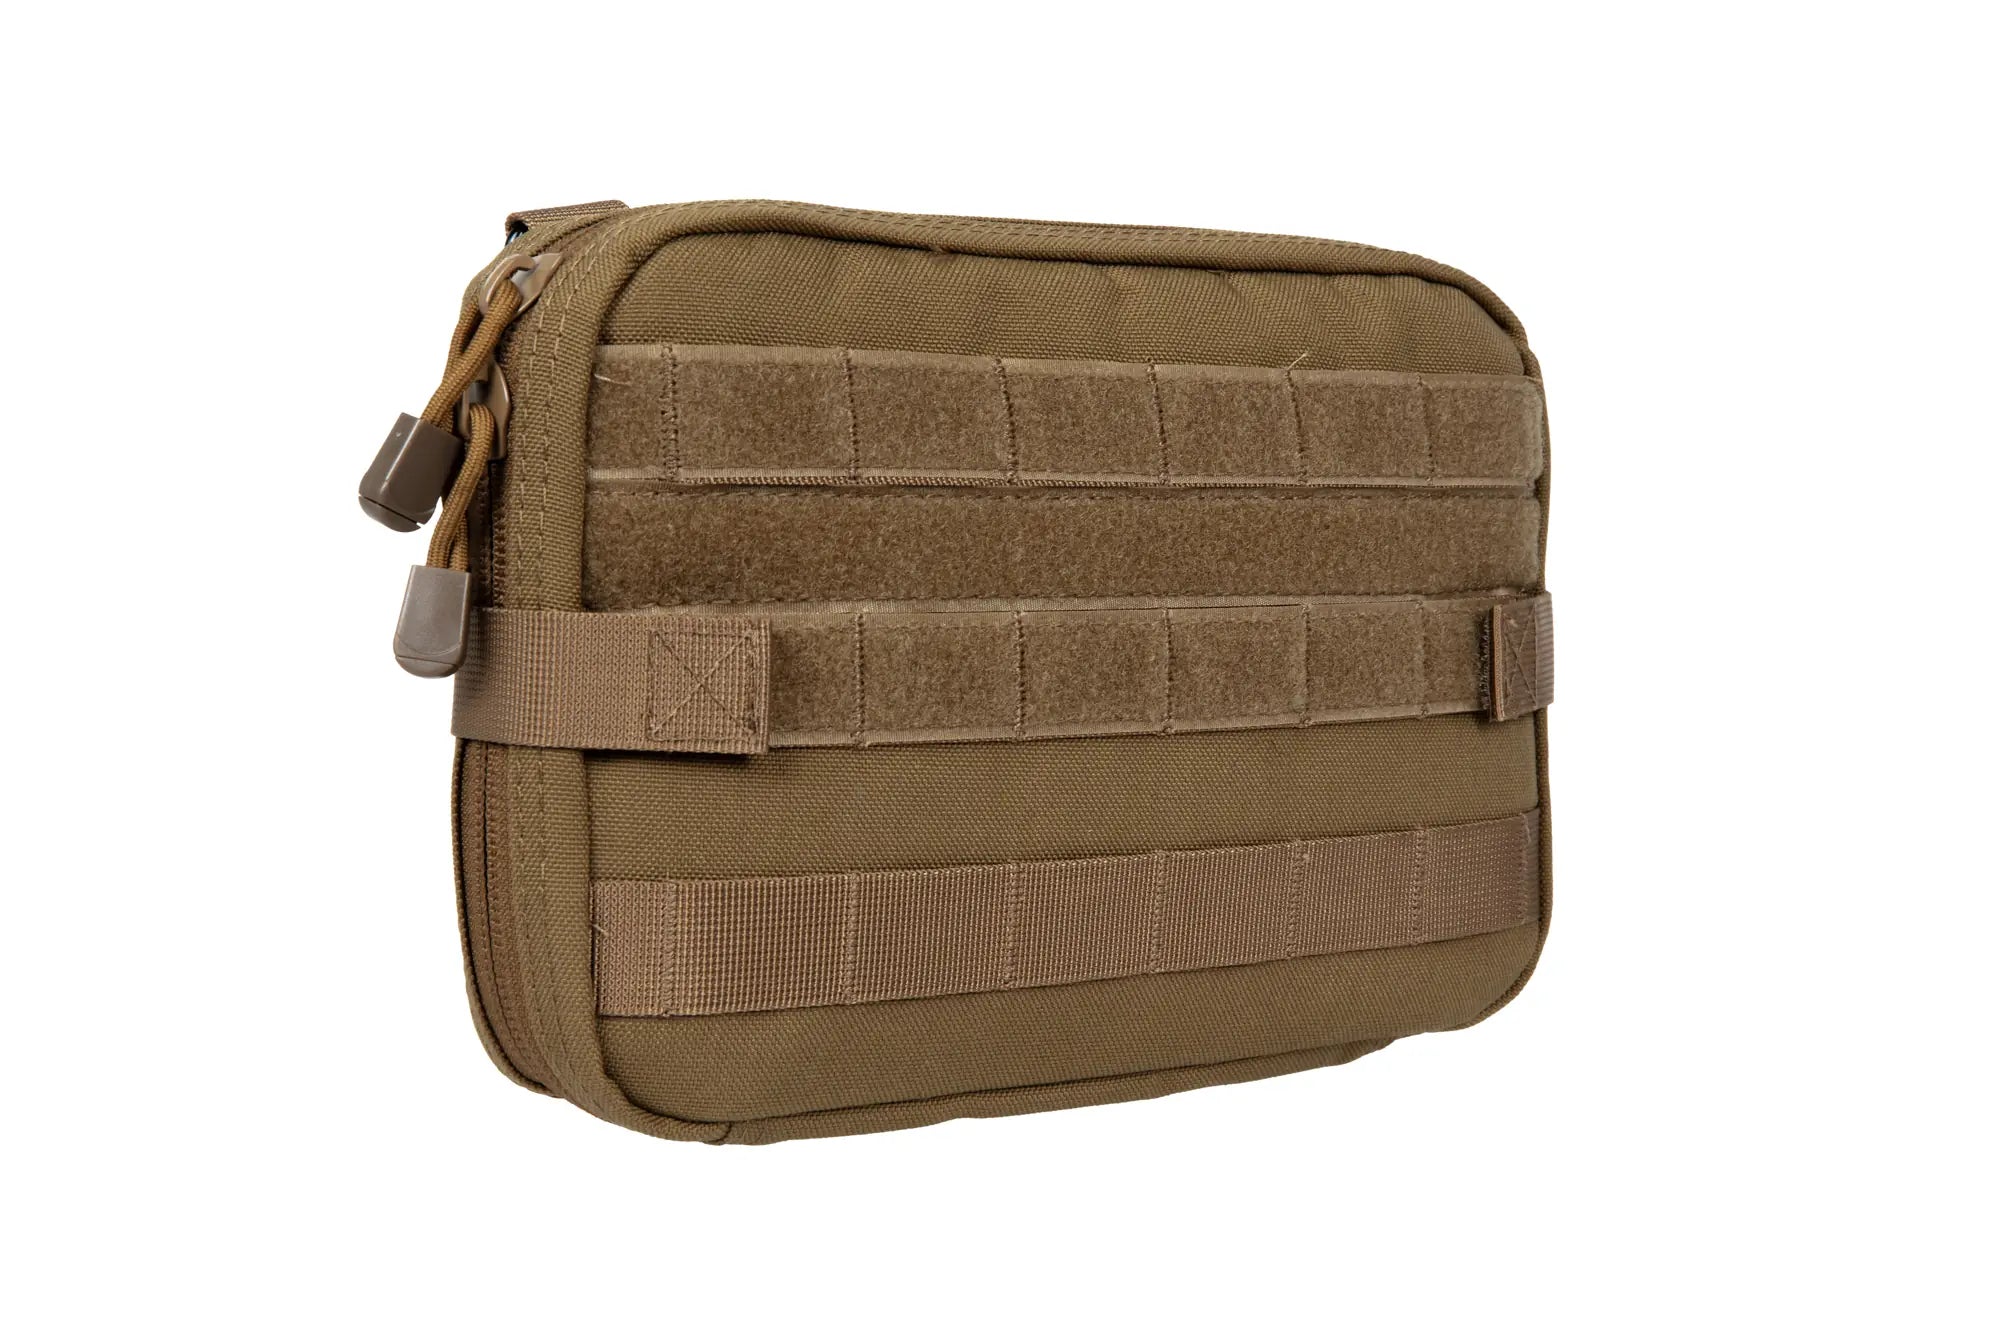 Large Administration Pouch with a Map Holder - Tan-2